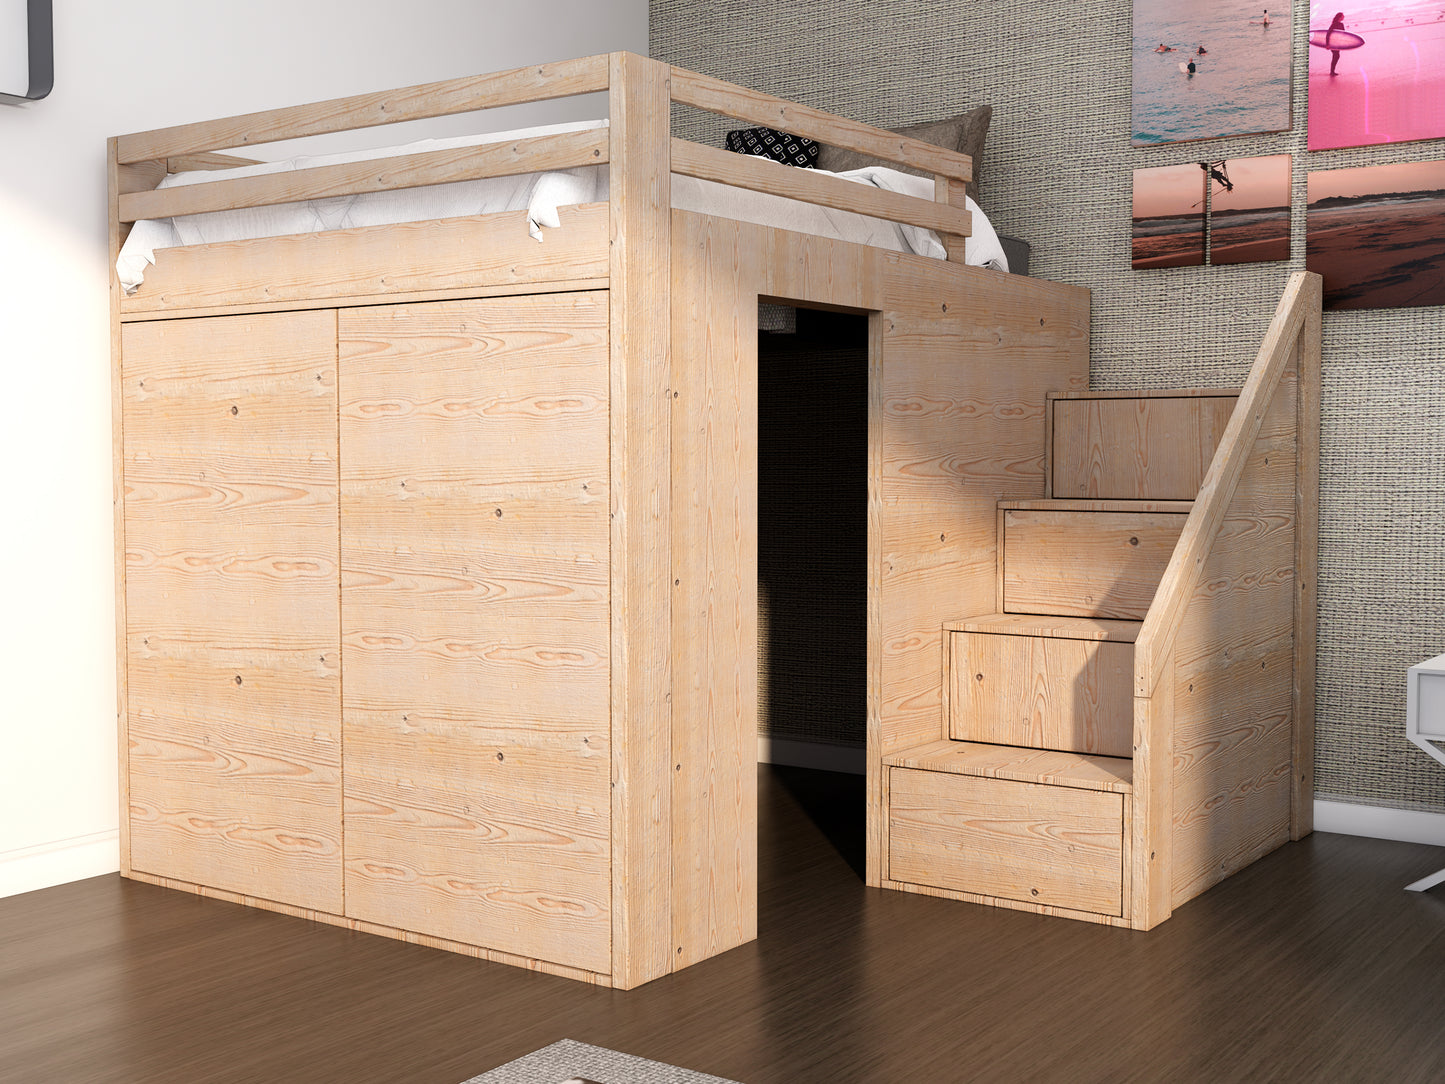 DIY Full-Size Wood Bunk Bed Plan and Animation: Build Your Own Stylish and Functional Bunk Bed